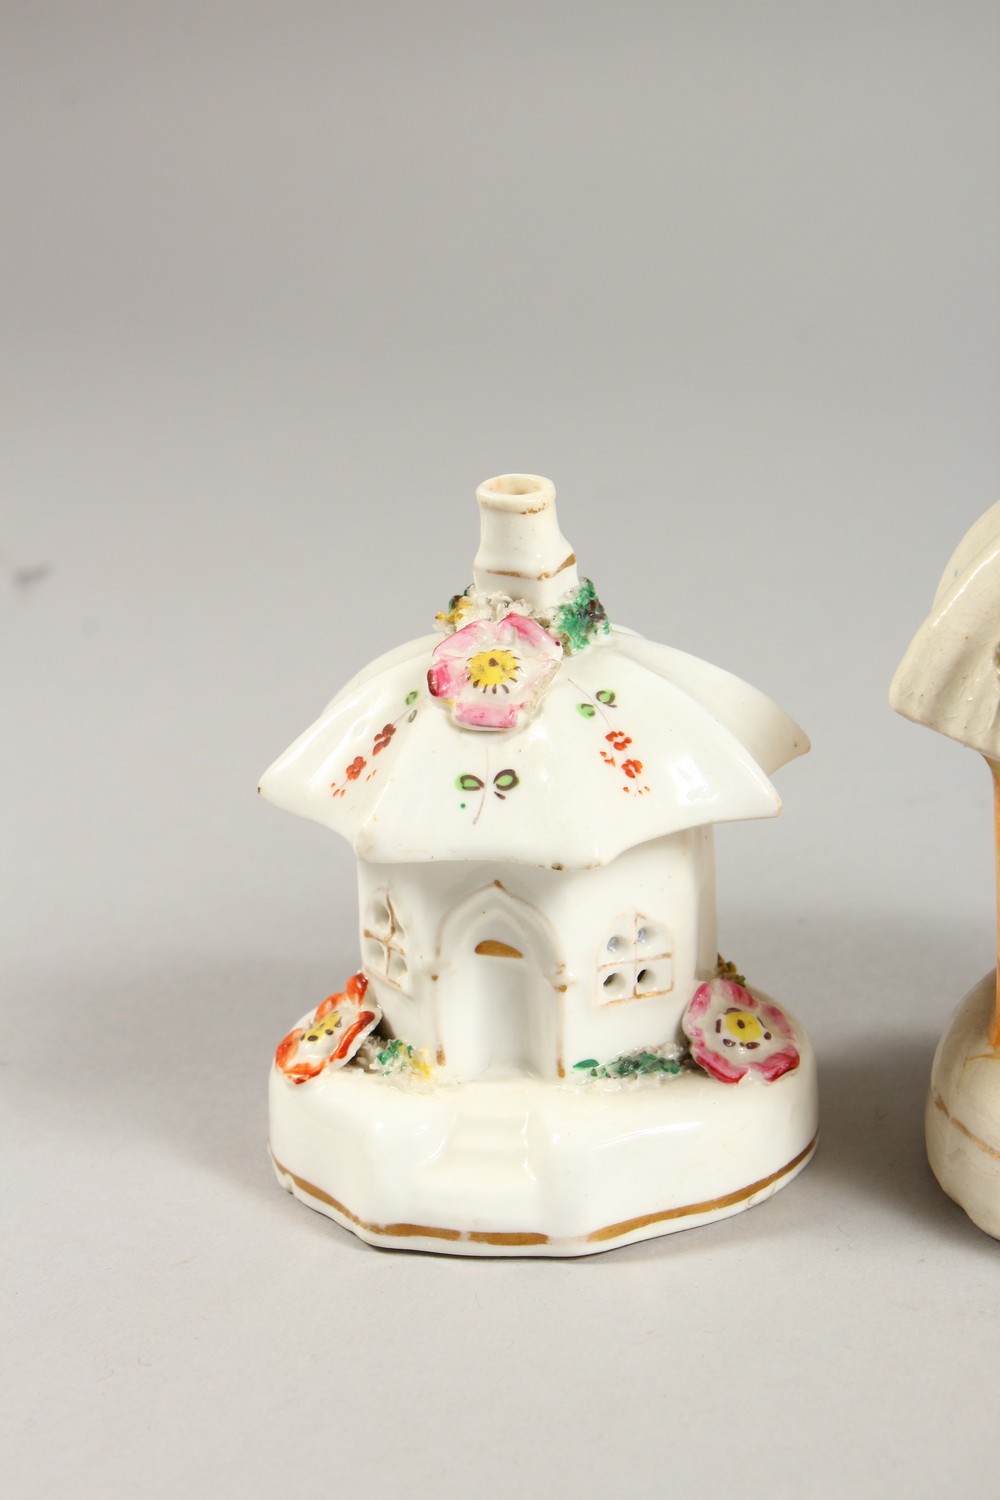 FOUR SMALL 19TH CENTURY STAFFORDSHIRE PASTILLE BURNER COTTAGES. - Image 5 of 6